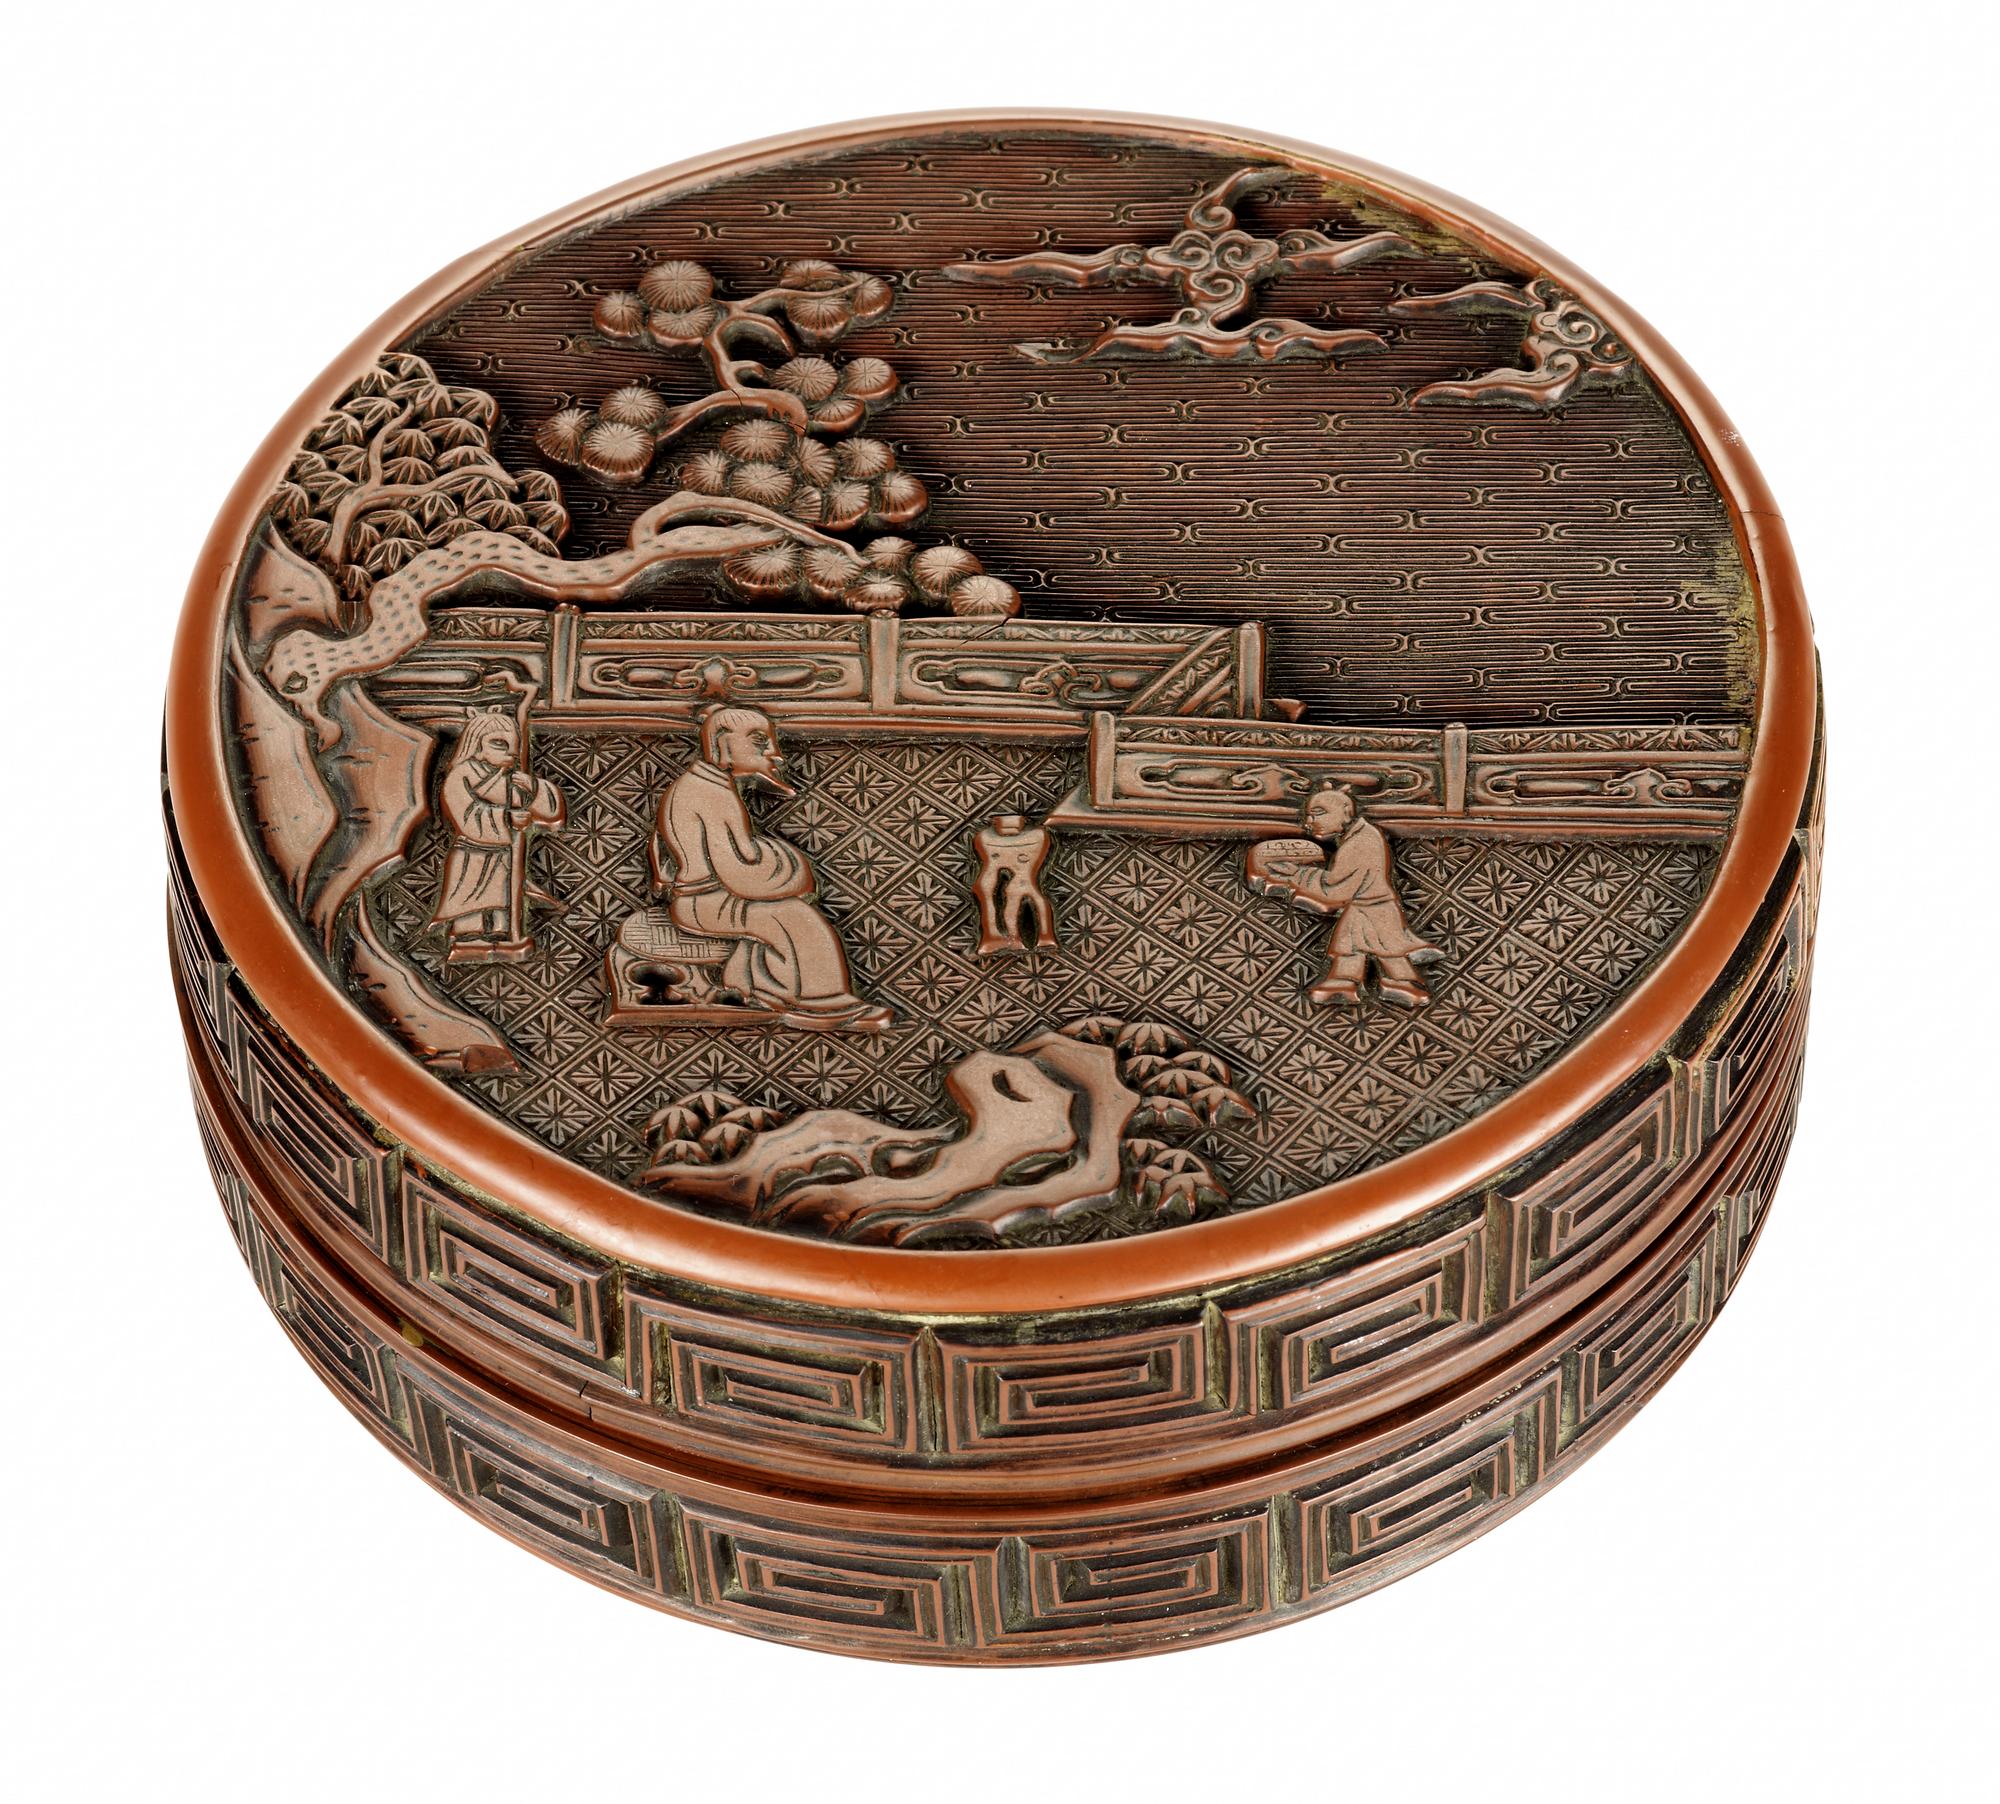 Box of red lacquered wood, small circular, decorated with a sage seated in a garden flanked by two attendants, with thunder pattern on the side: China, Yuan dynasty, by Zhang Cheng, 1279-1368.